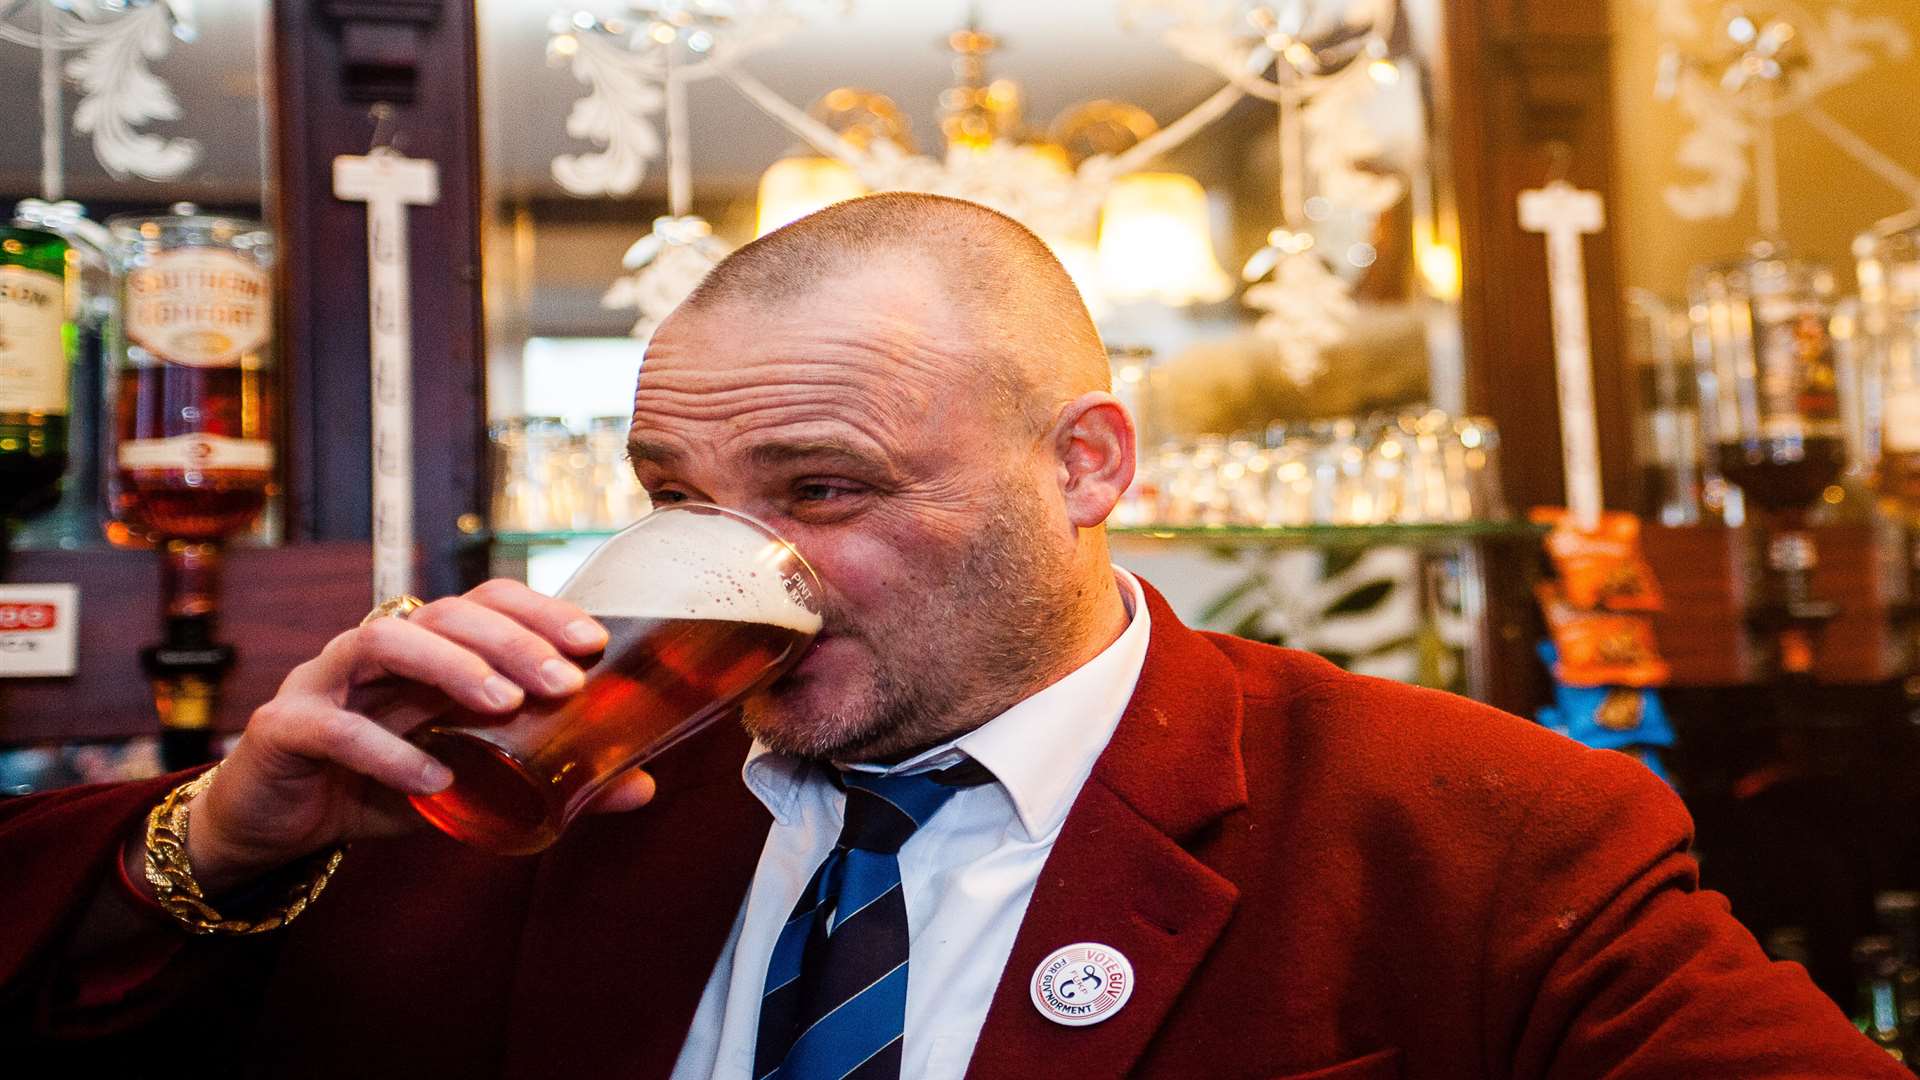 Al Murray visits Thanet on election campaign